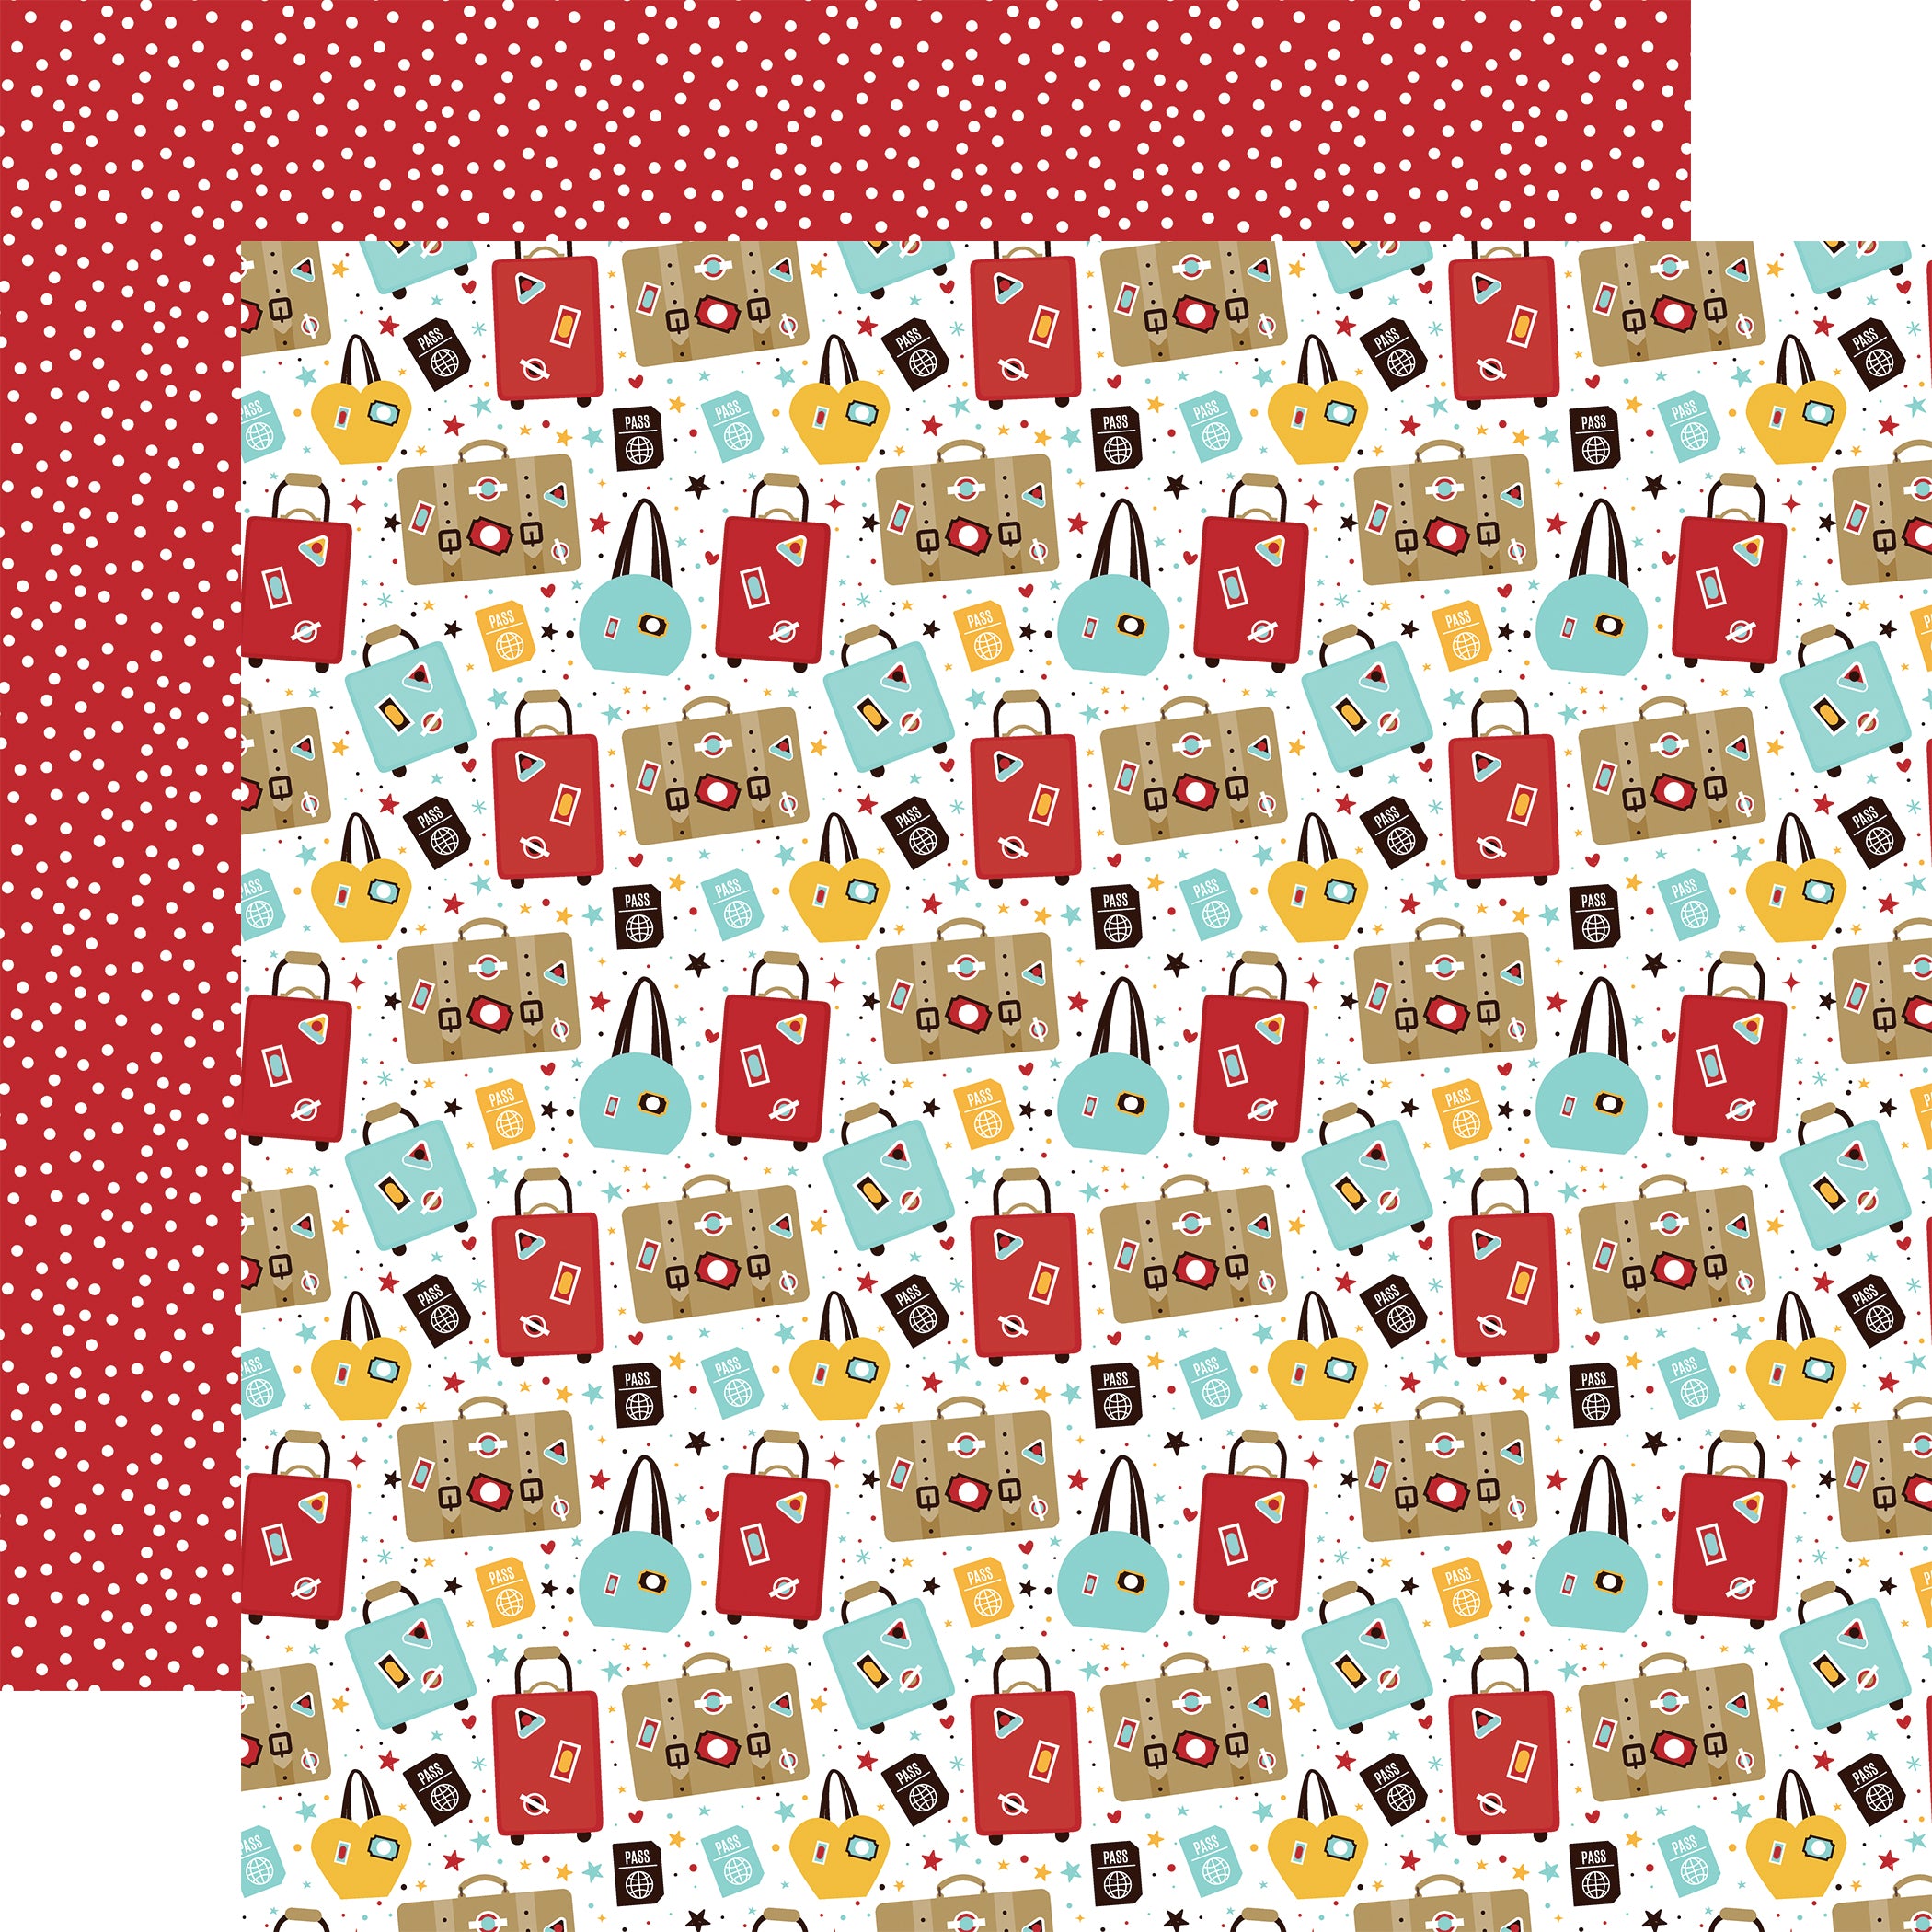 A Magical Voyage Collection Let's Sail Luggage 12 x 12 Double-Sided Scrapbook Paper by Echo Park Paper